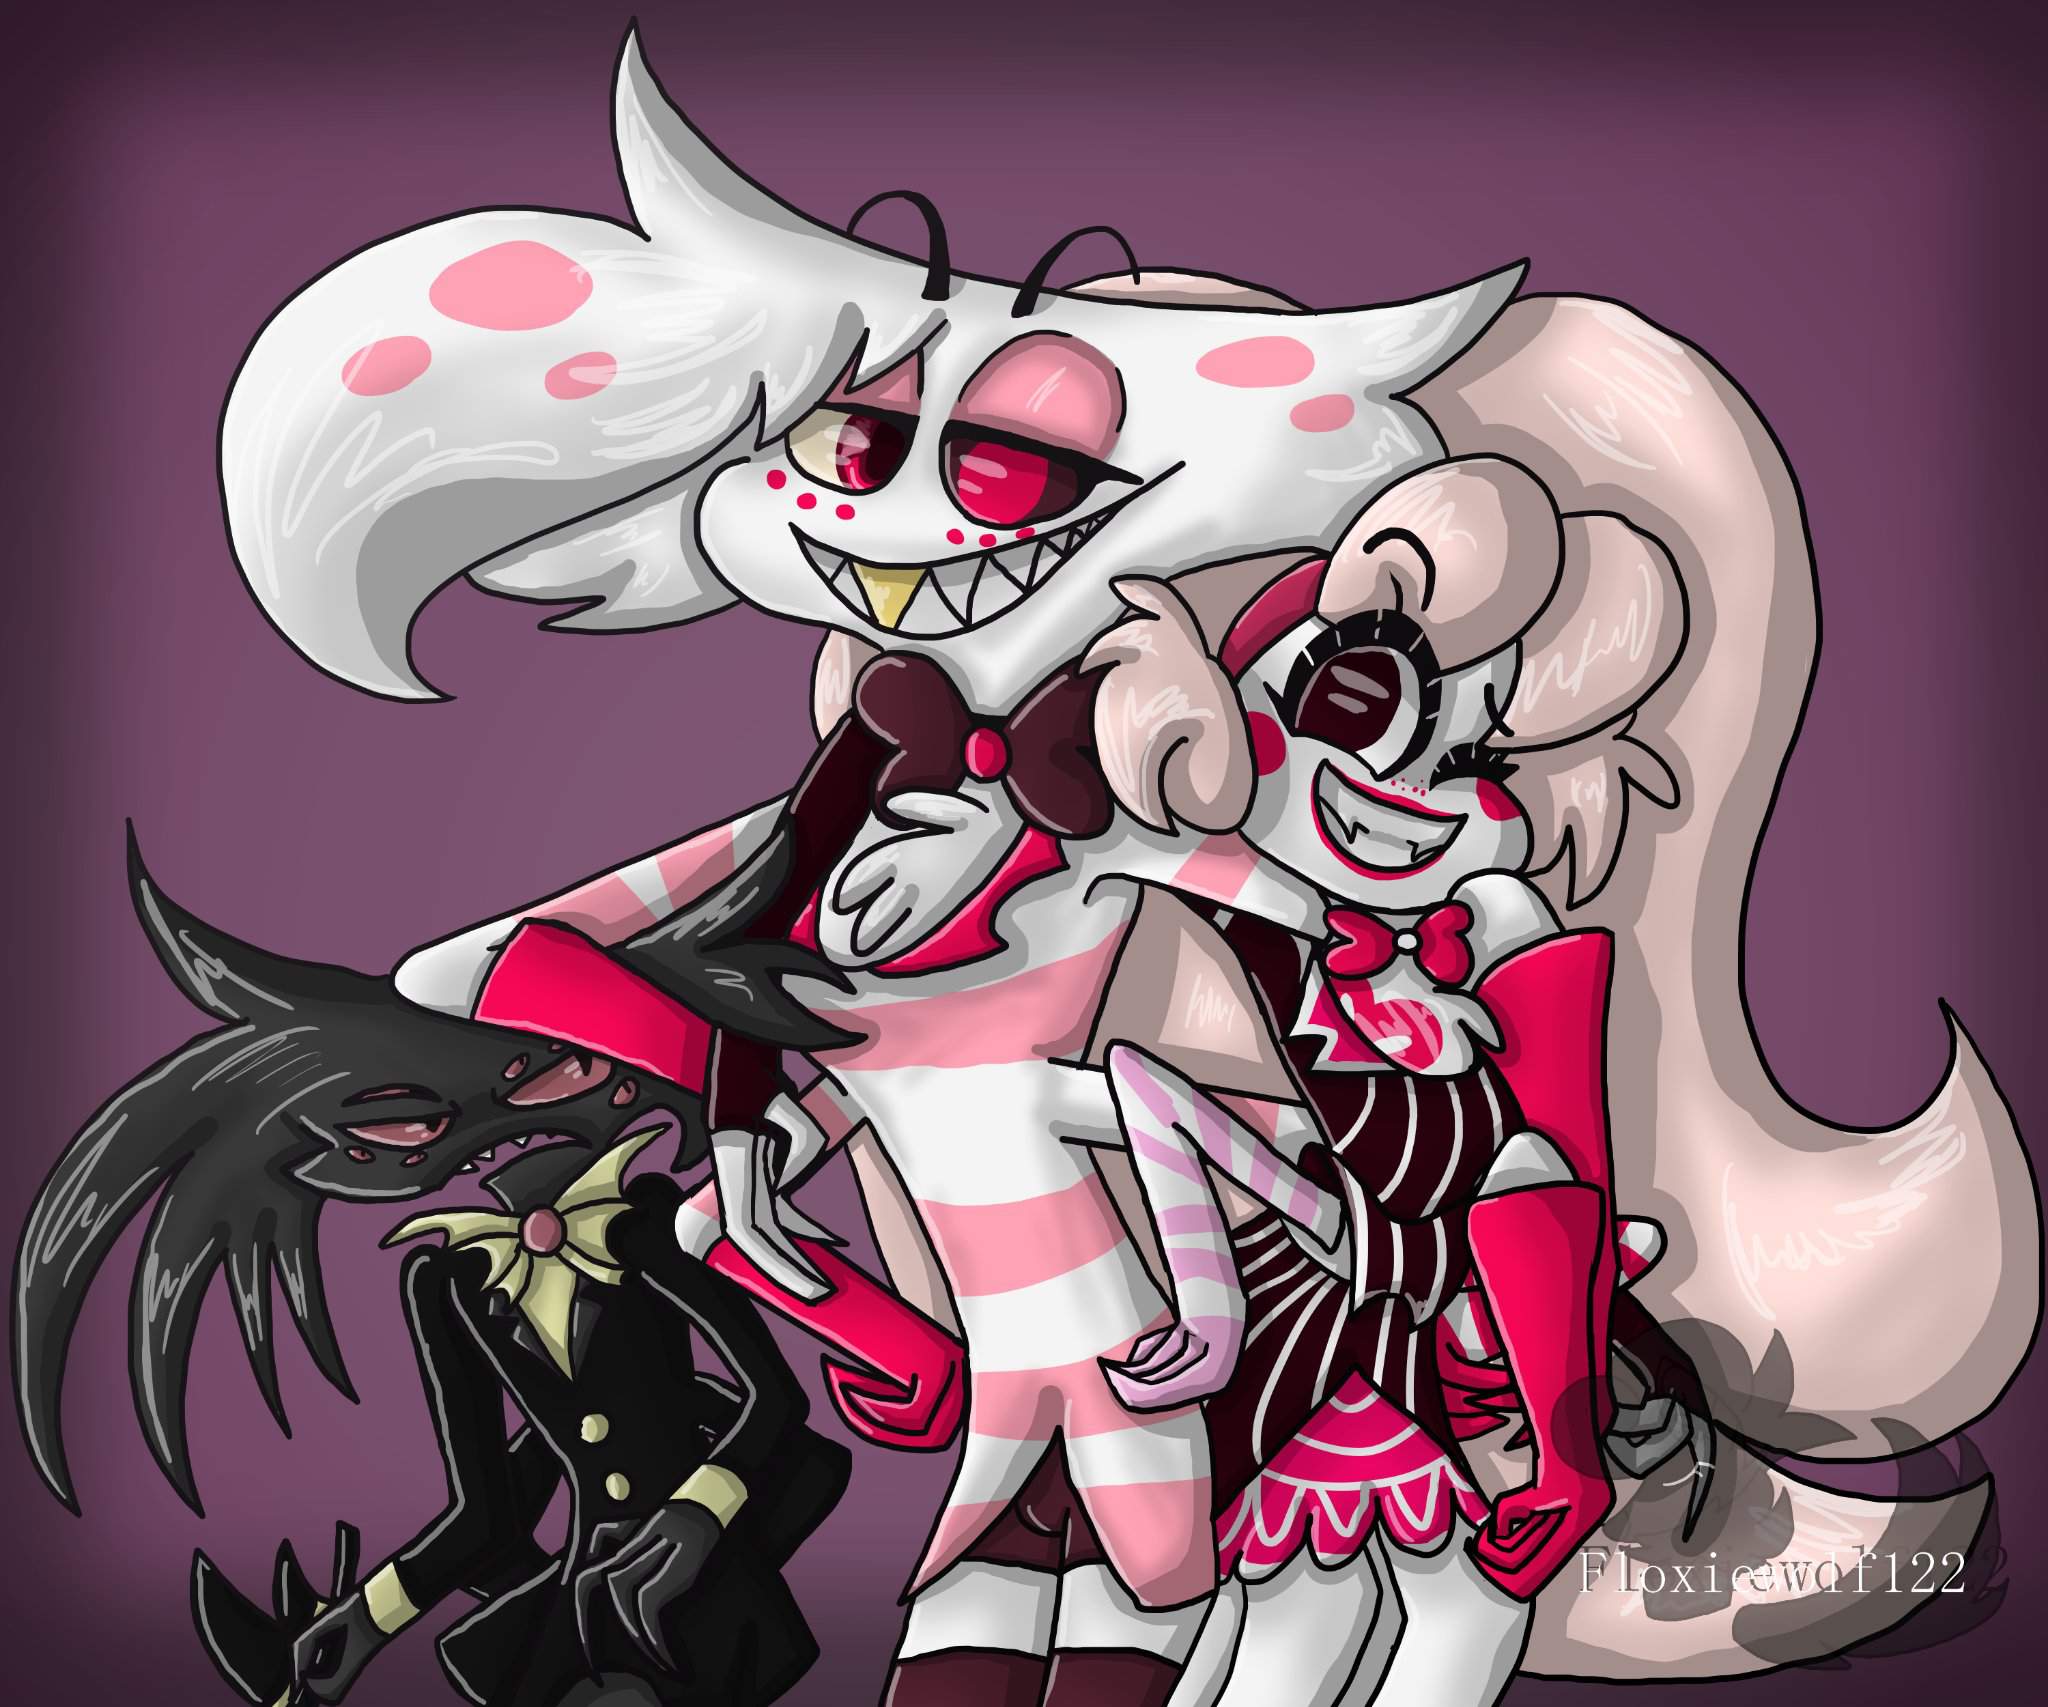 ❤ The Spider Siblings ❤ Hazbin Hotel (official) Amino.